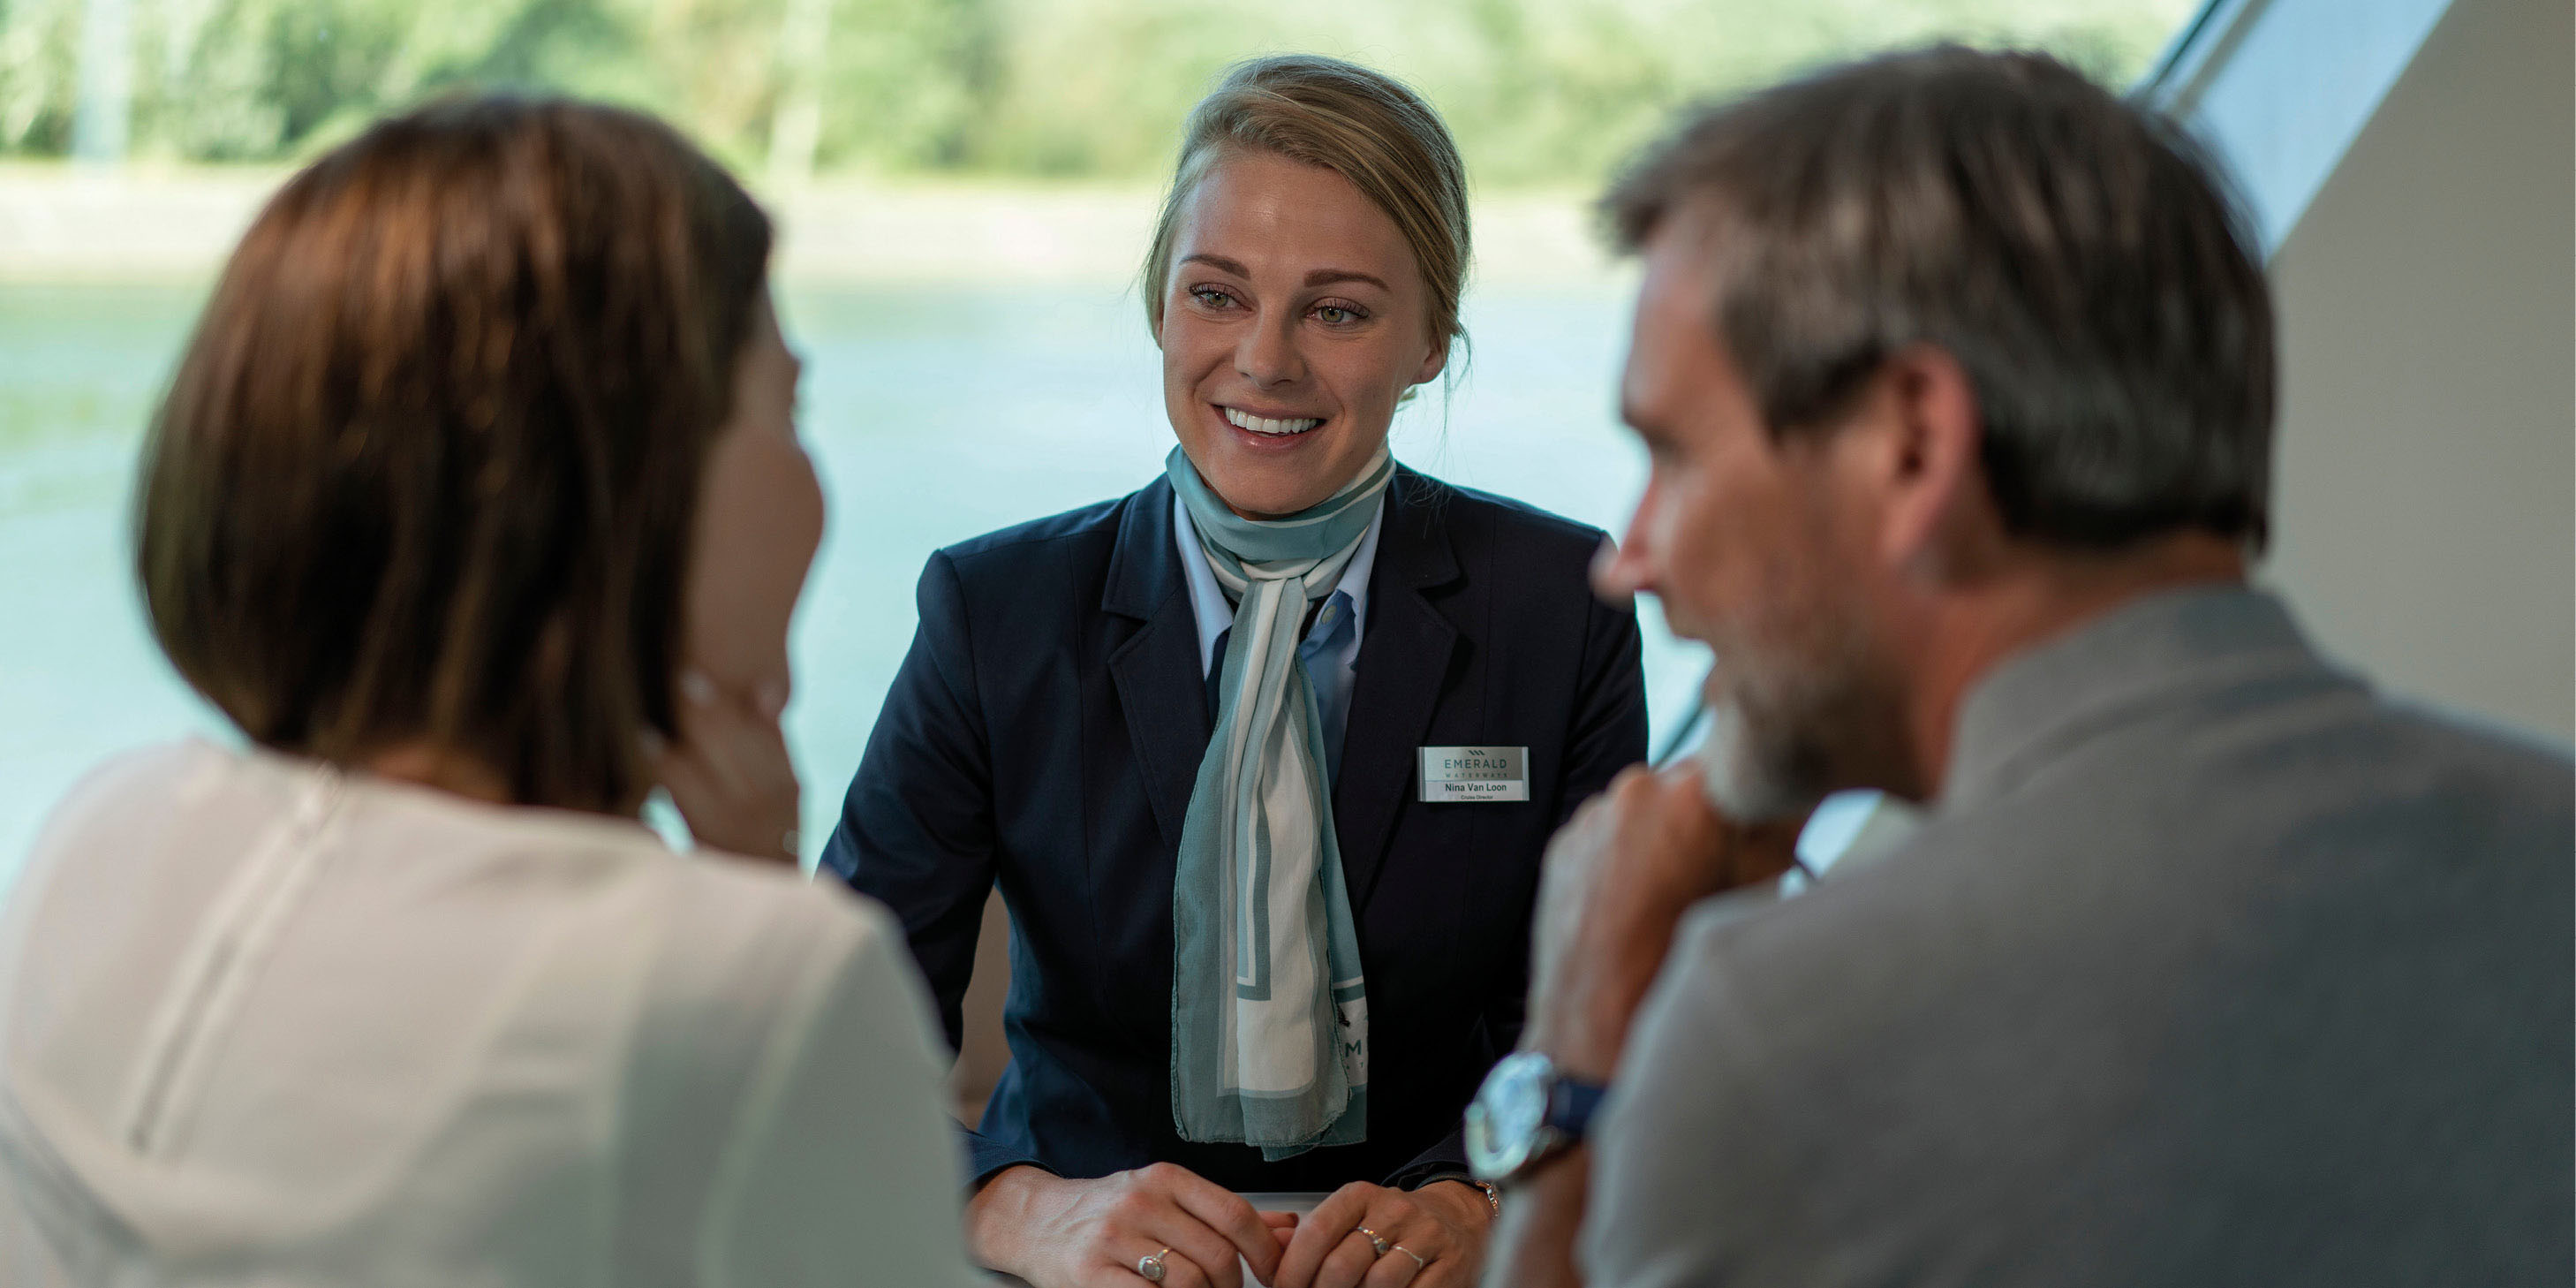 Cruise director helping guests on board a luxury river ship in Europe